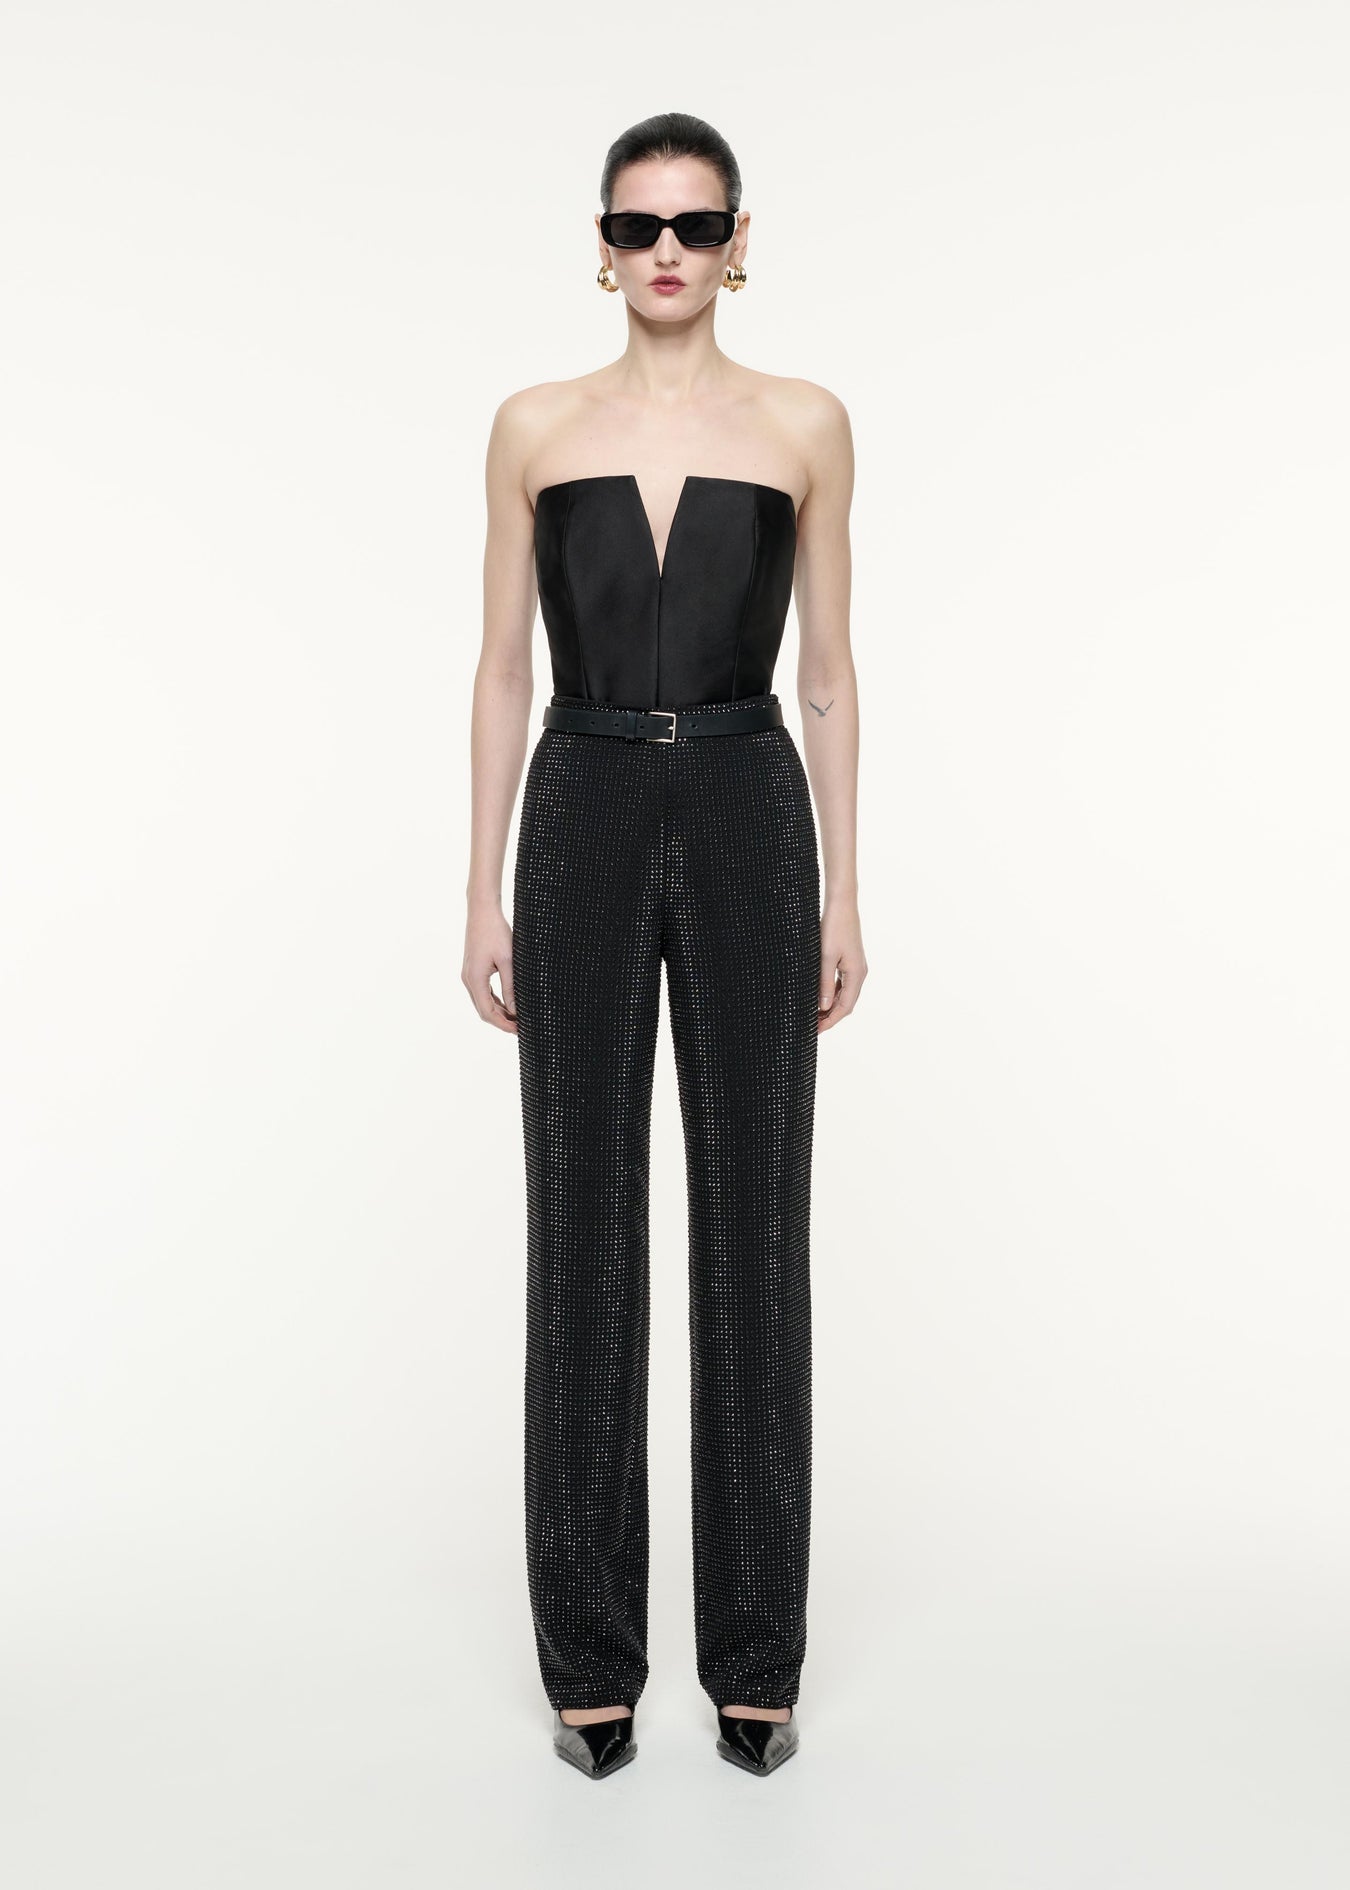 A front view image of a model wearing the Diamante Trouser in Black